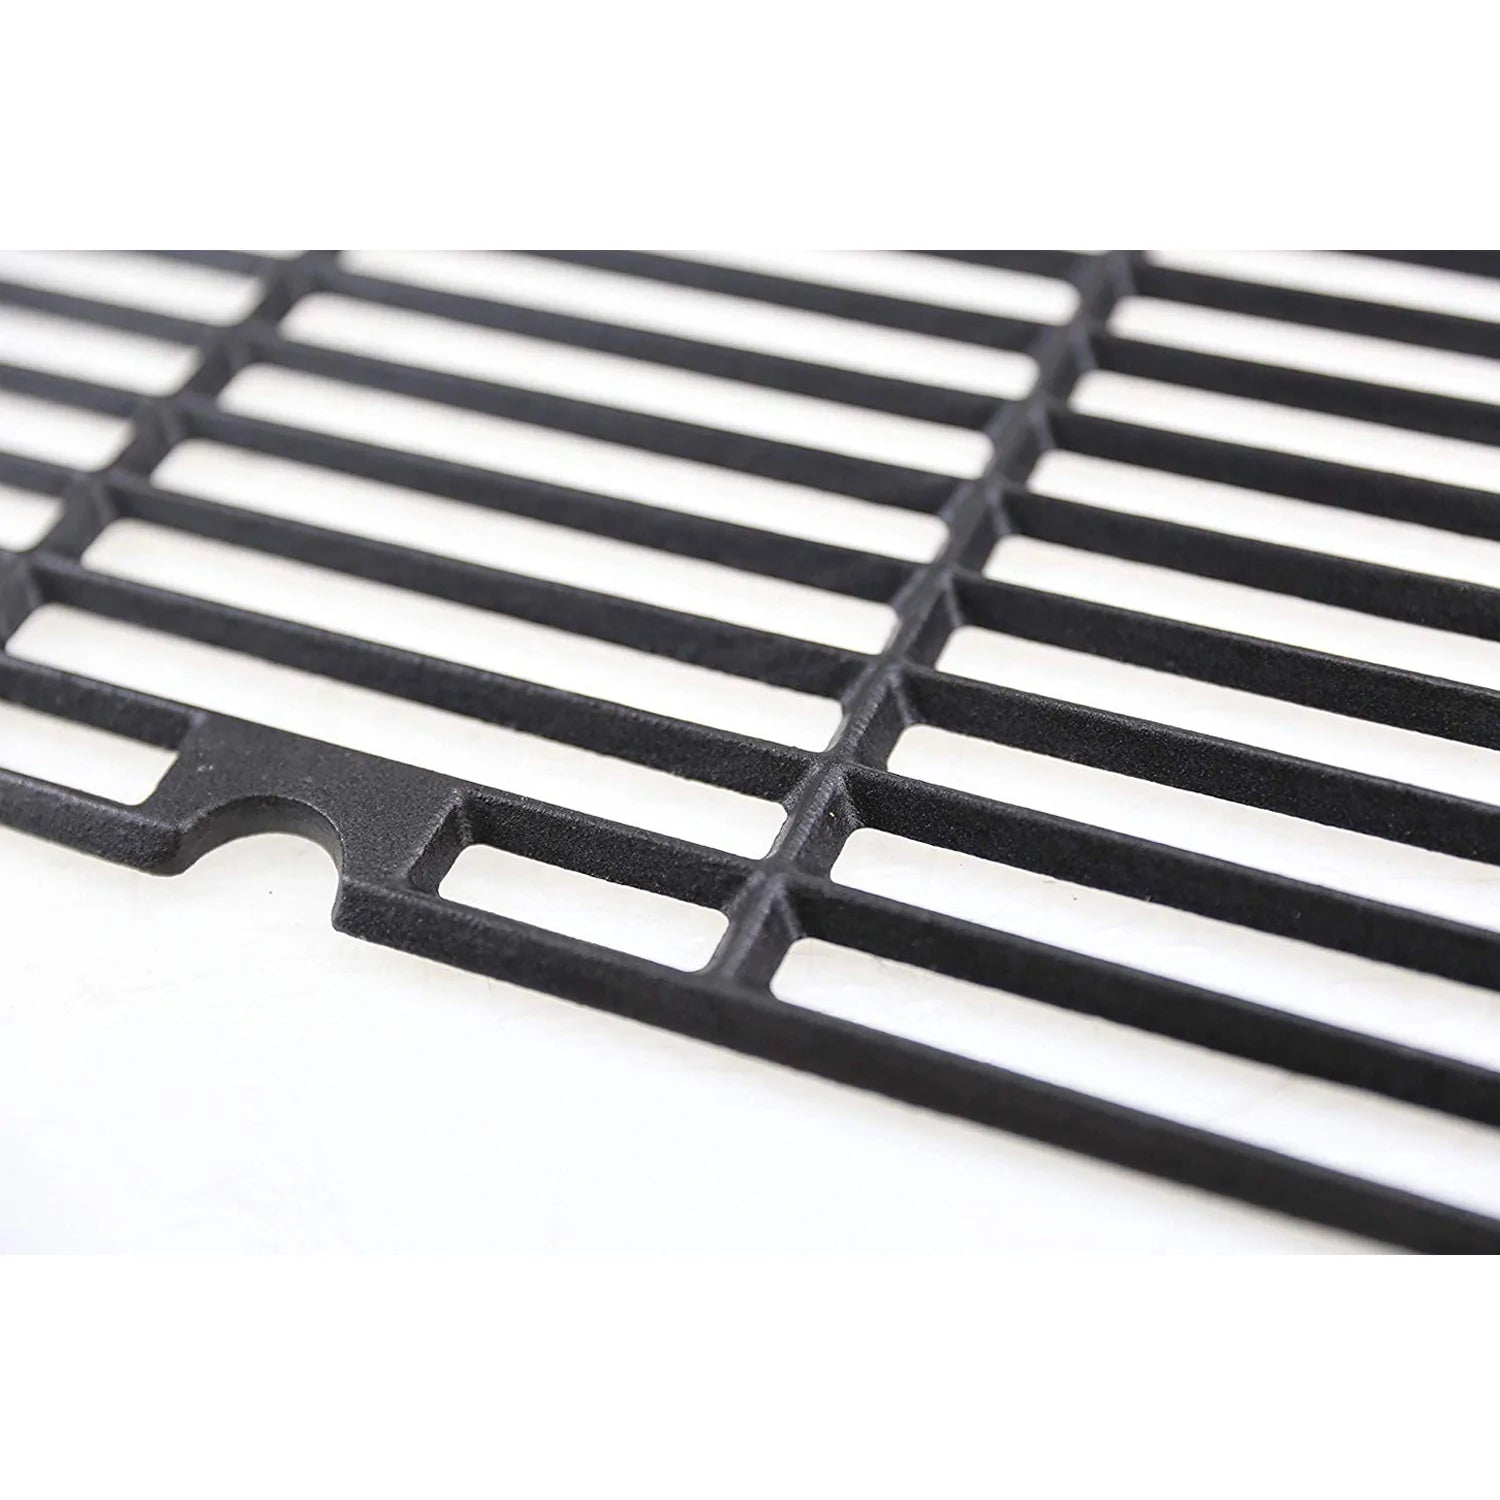 Cooking Grates for Charbroil Thermos 461442114, 461442513, 461471717, 4614724174, 463420507, 463420707, 463421107 4 Burner, Grill Replacement Parts